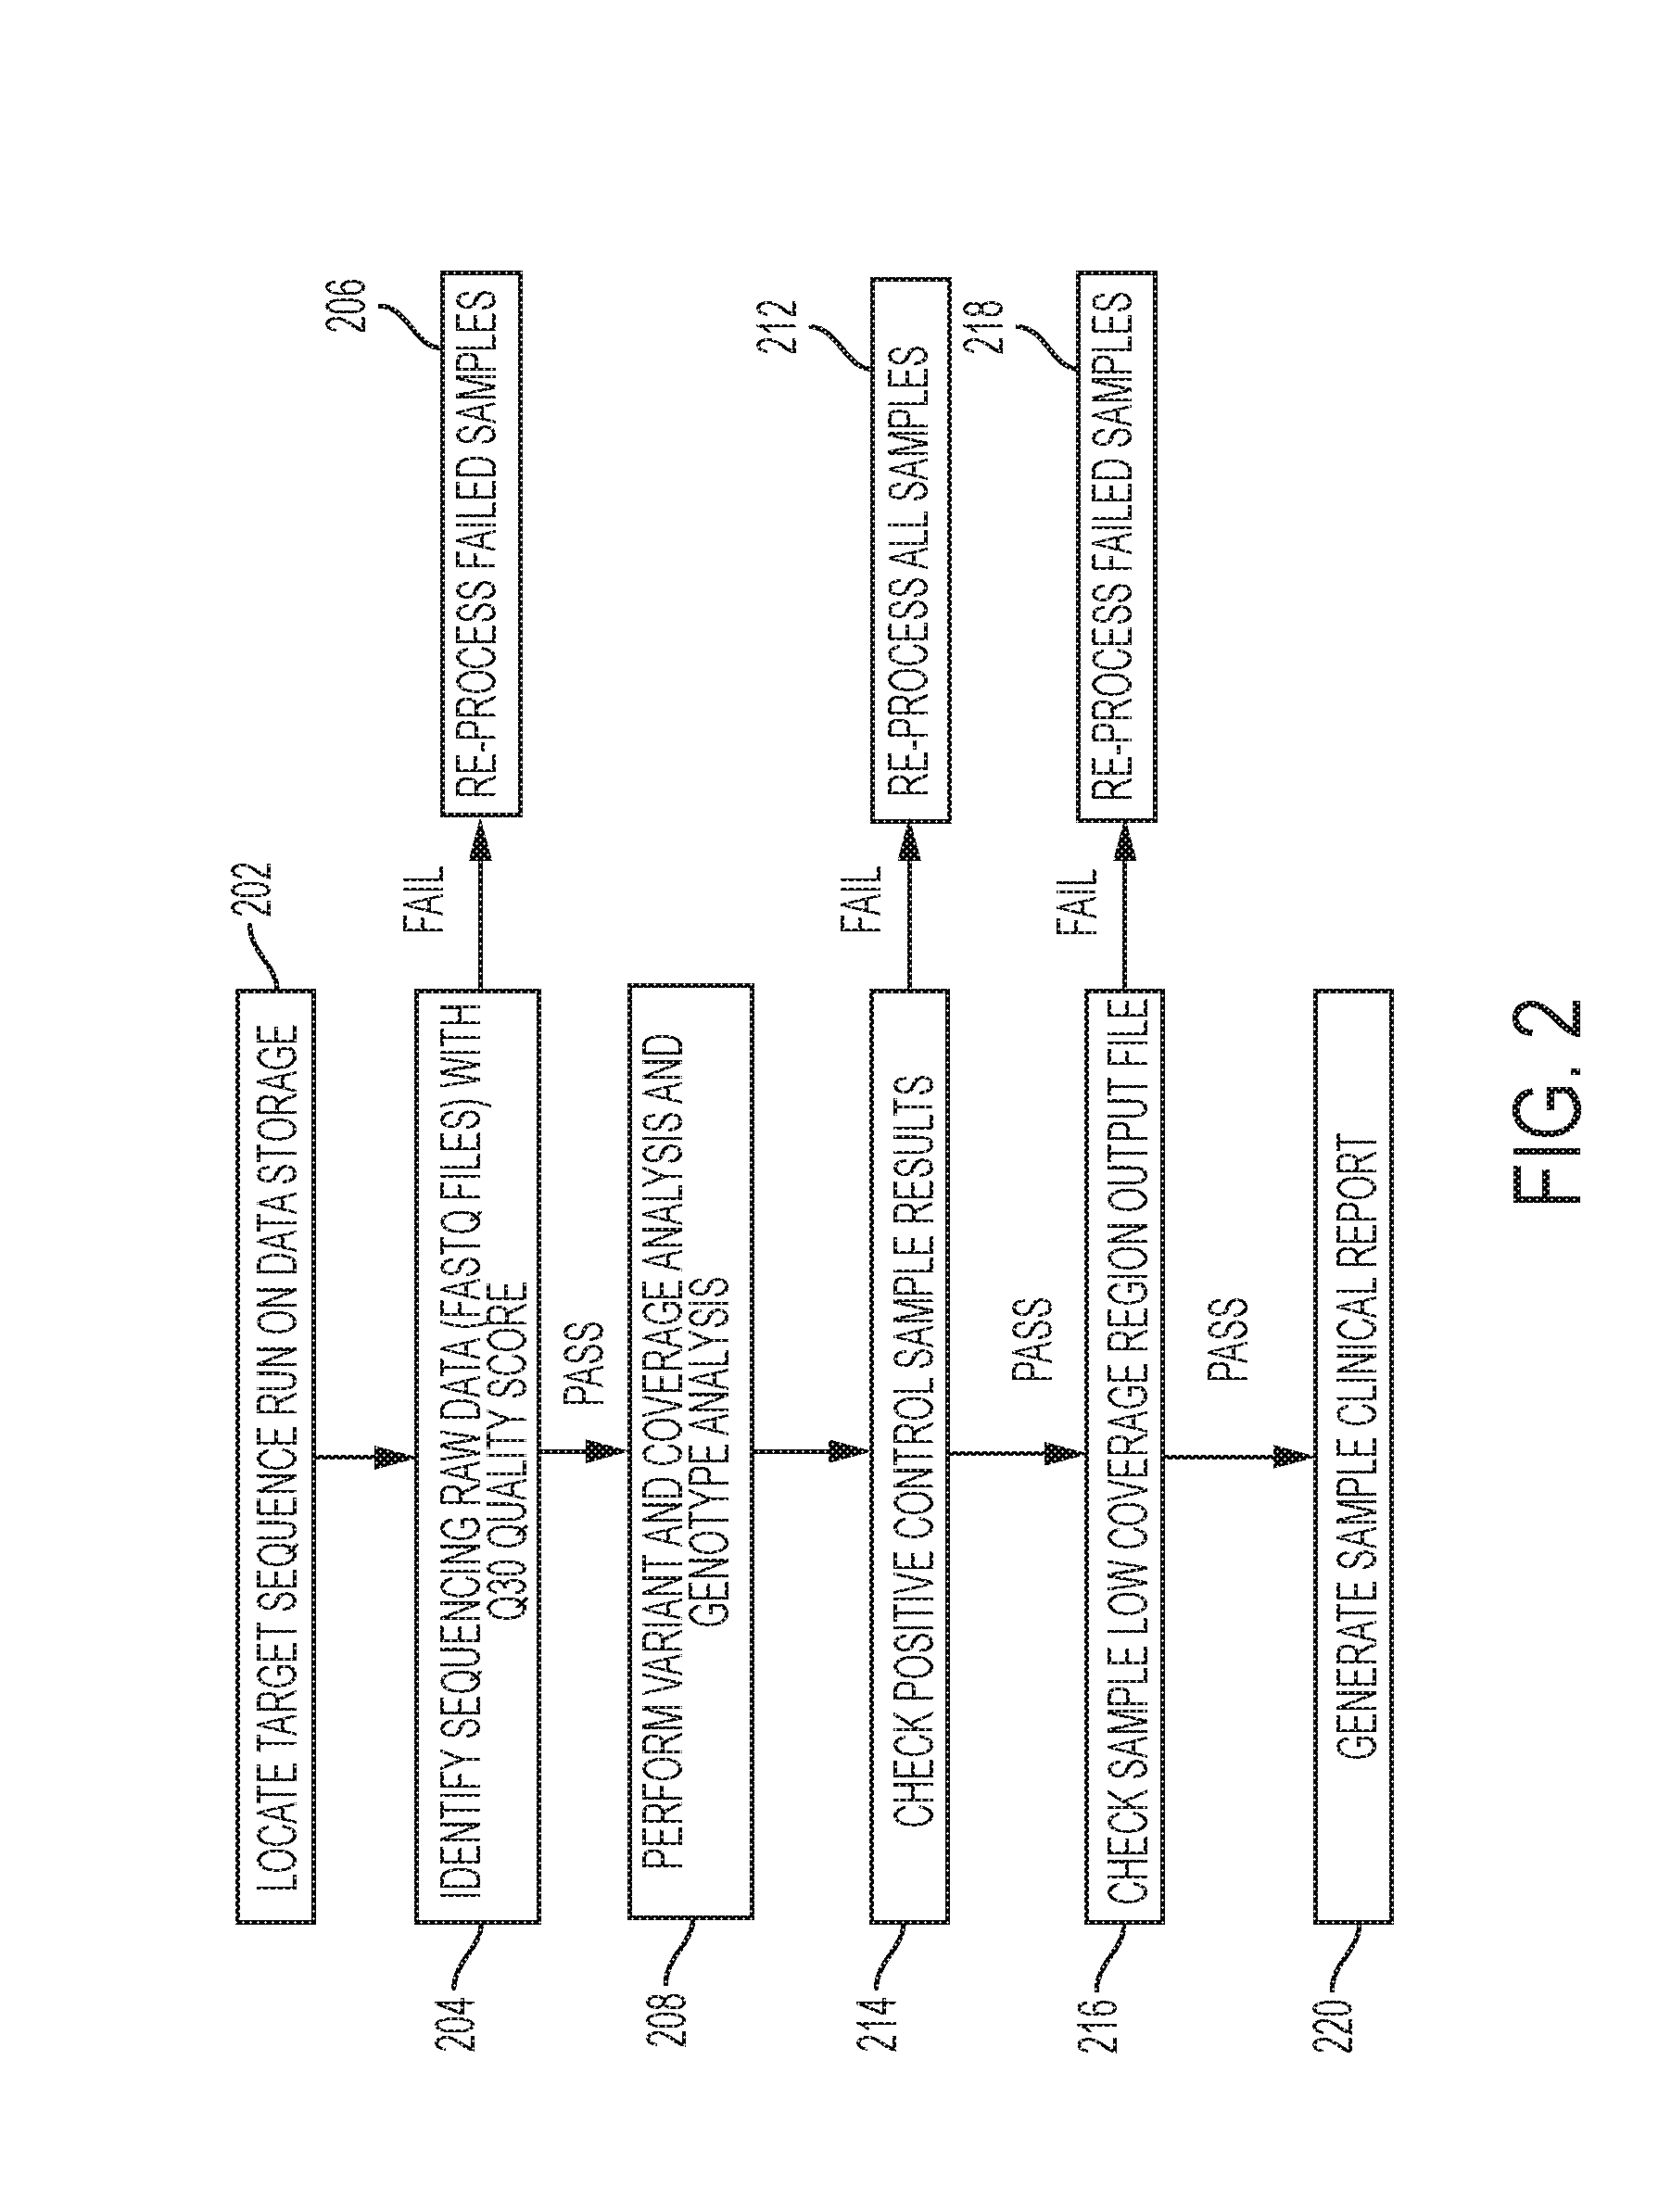 System, method and graphical user interface for creating modular, patient transportable genomic analytic data